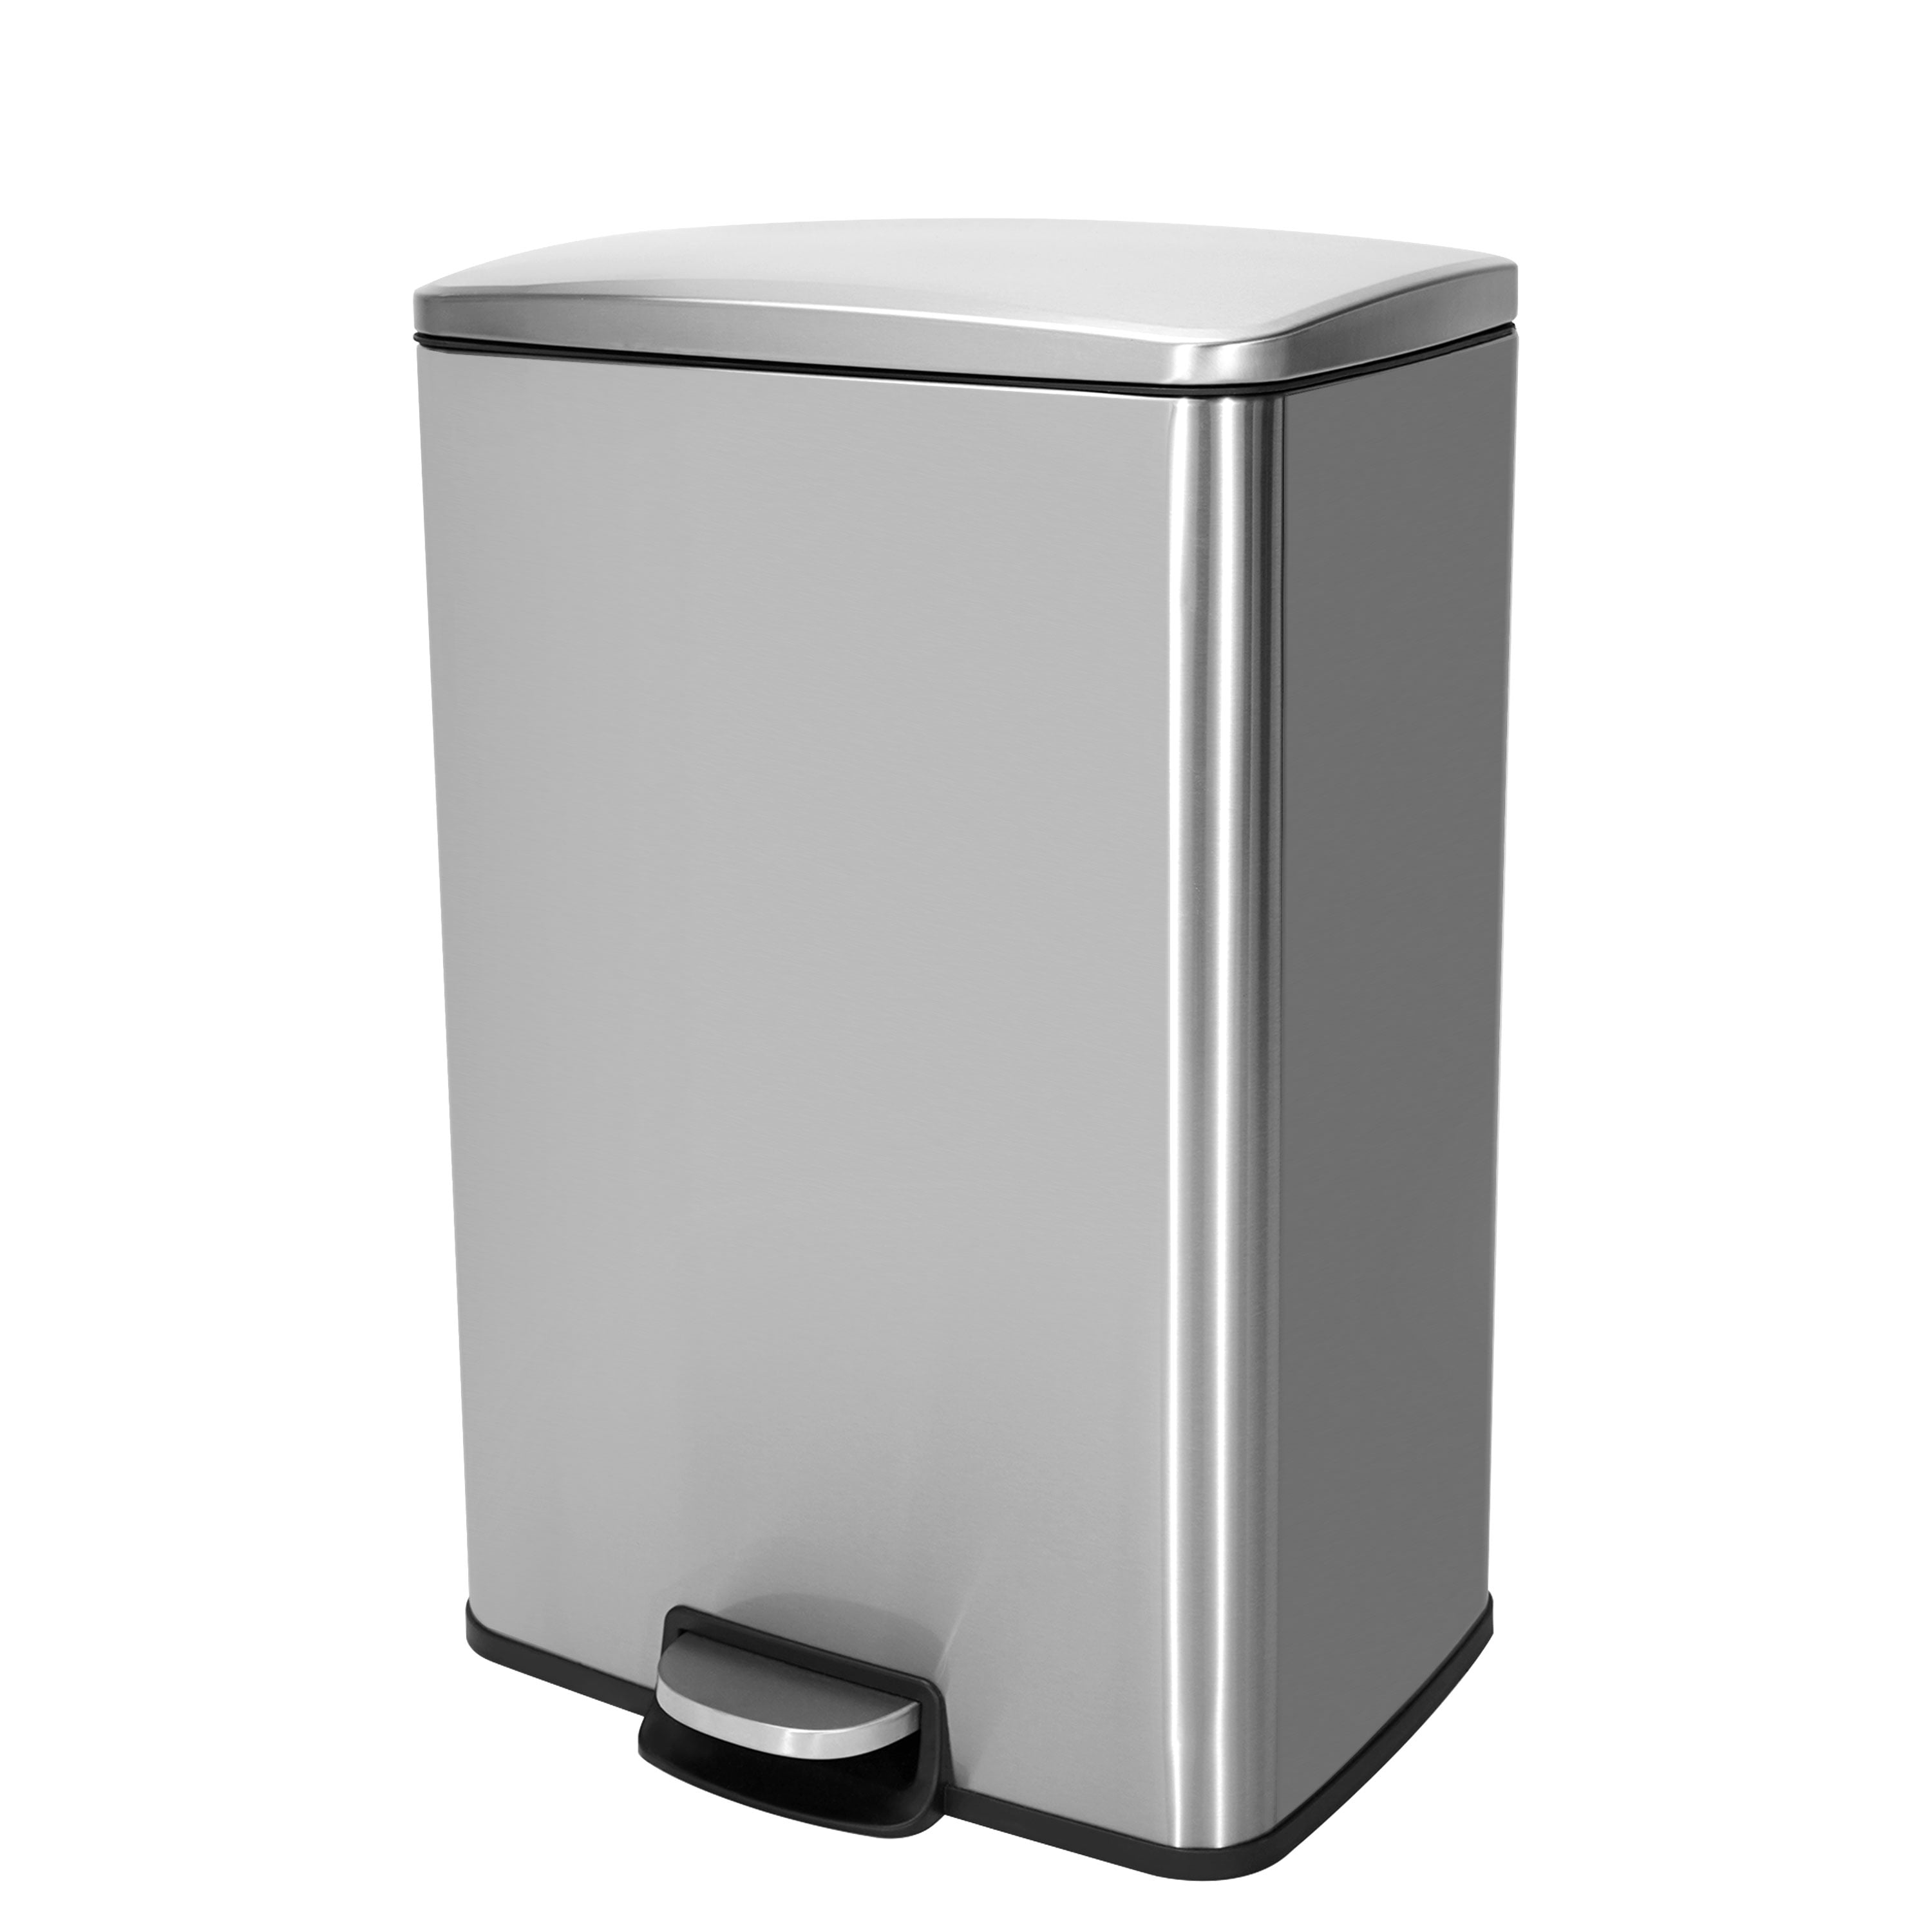 Innovaze 13 Gallon Stainless Steel Step Rectangular Kitchen Trash Can Stainless Steel Trash Cans Walmart